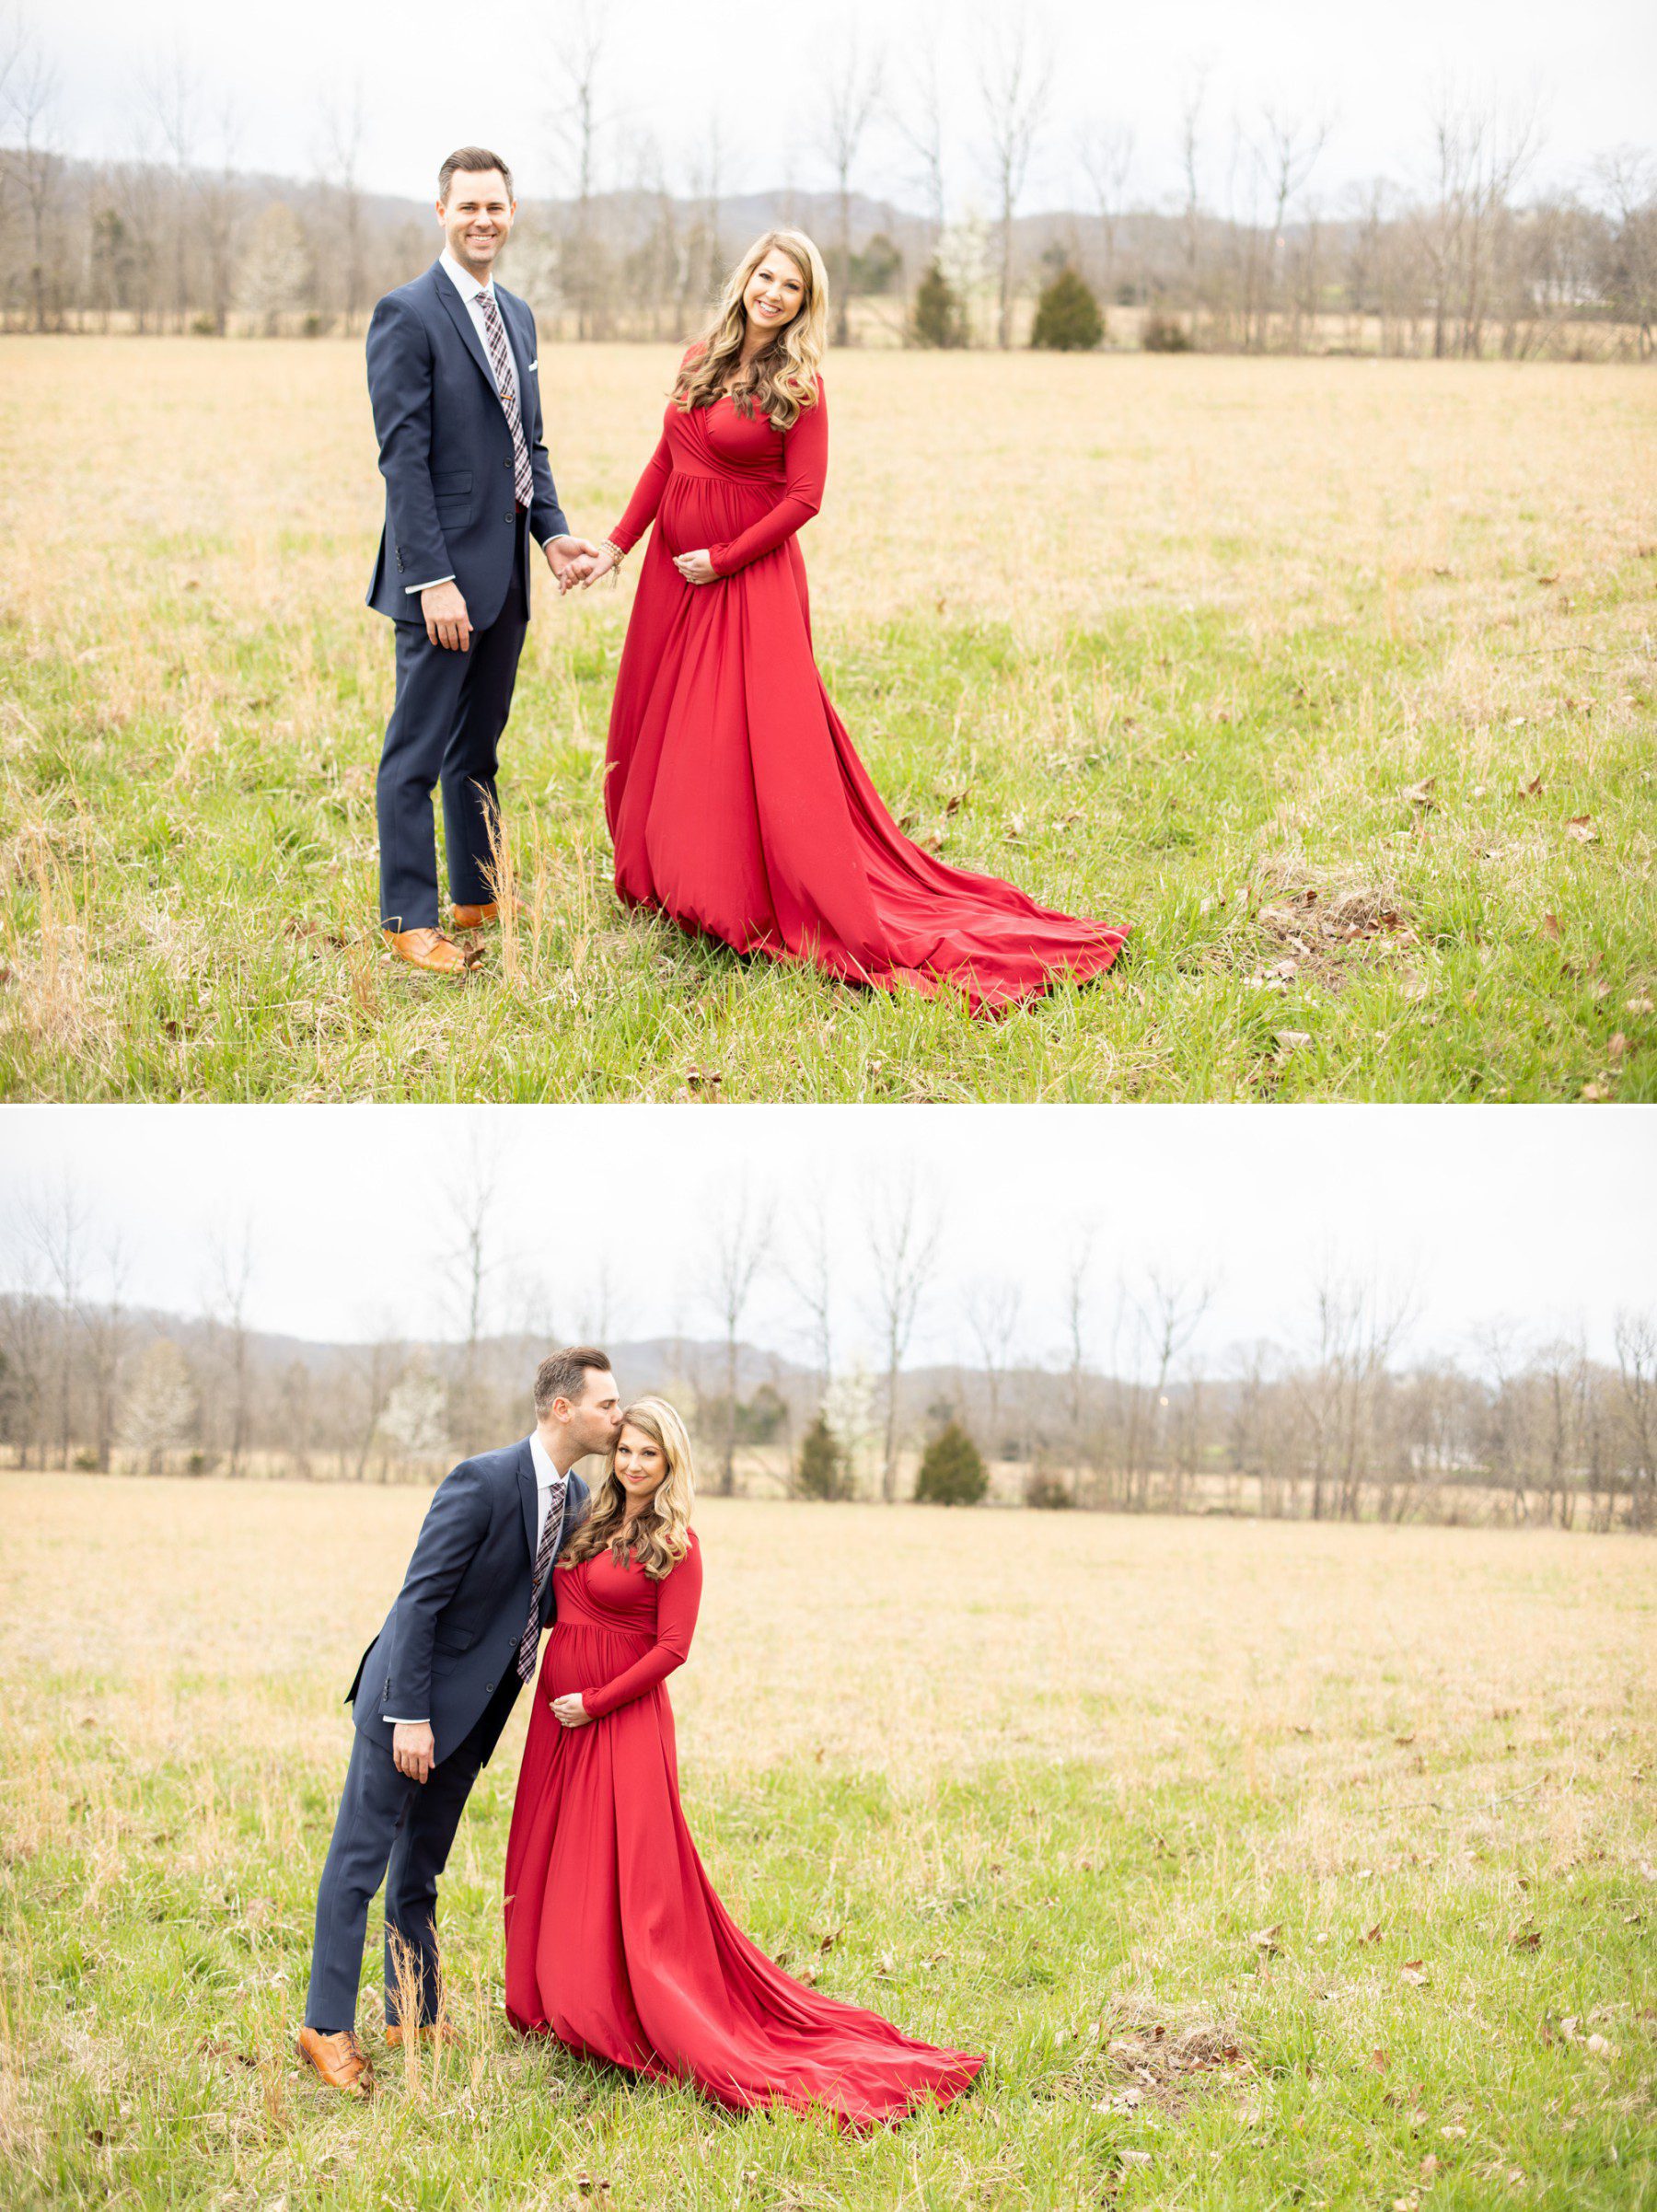 Maternity session with suit and long red gown in farm field Mint Springs Farm Nolensville, TN